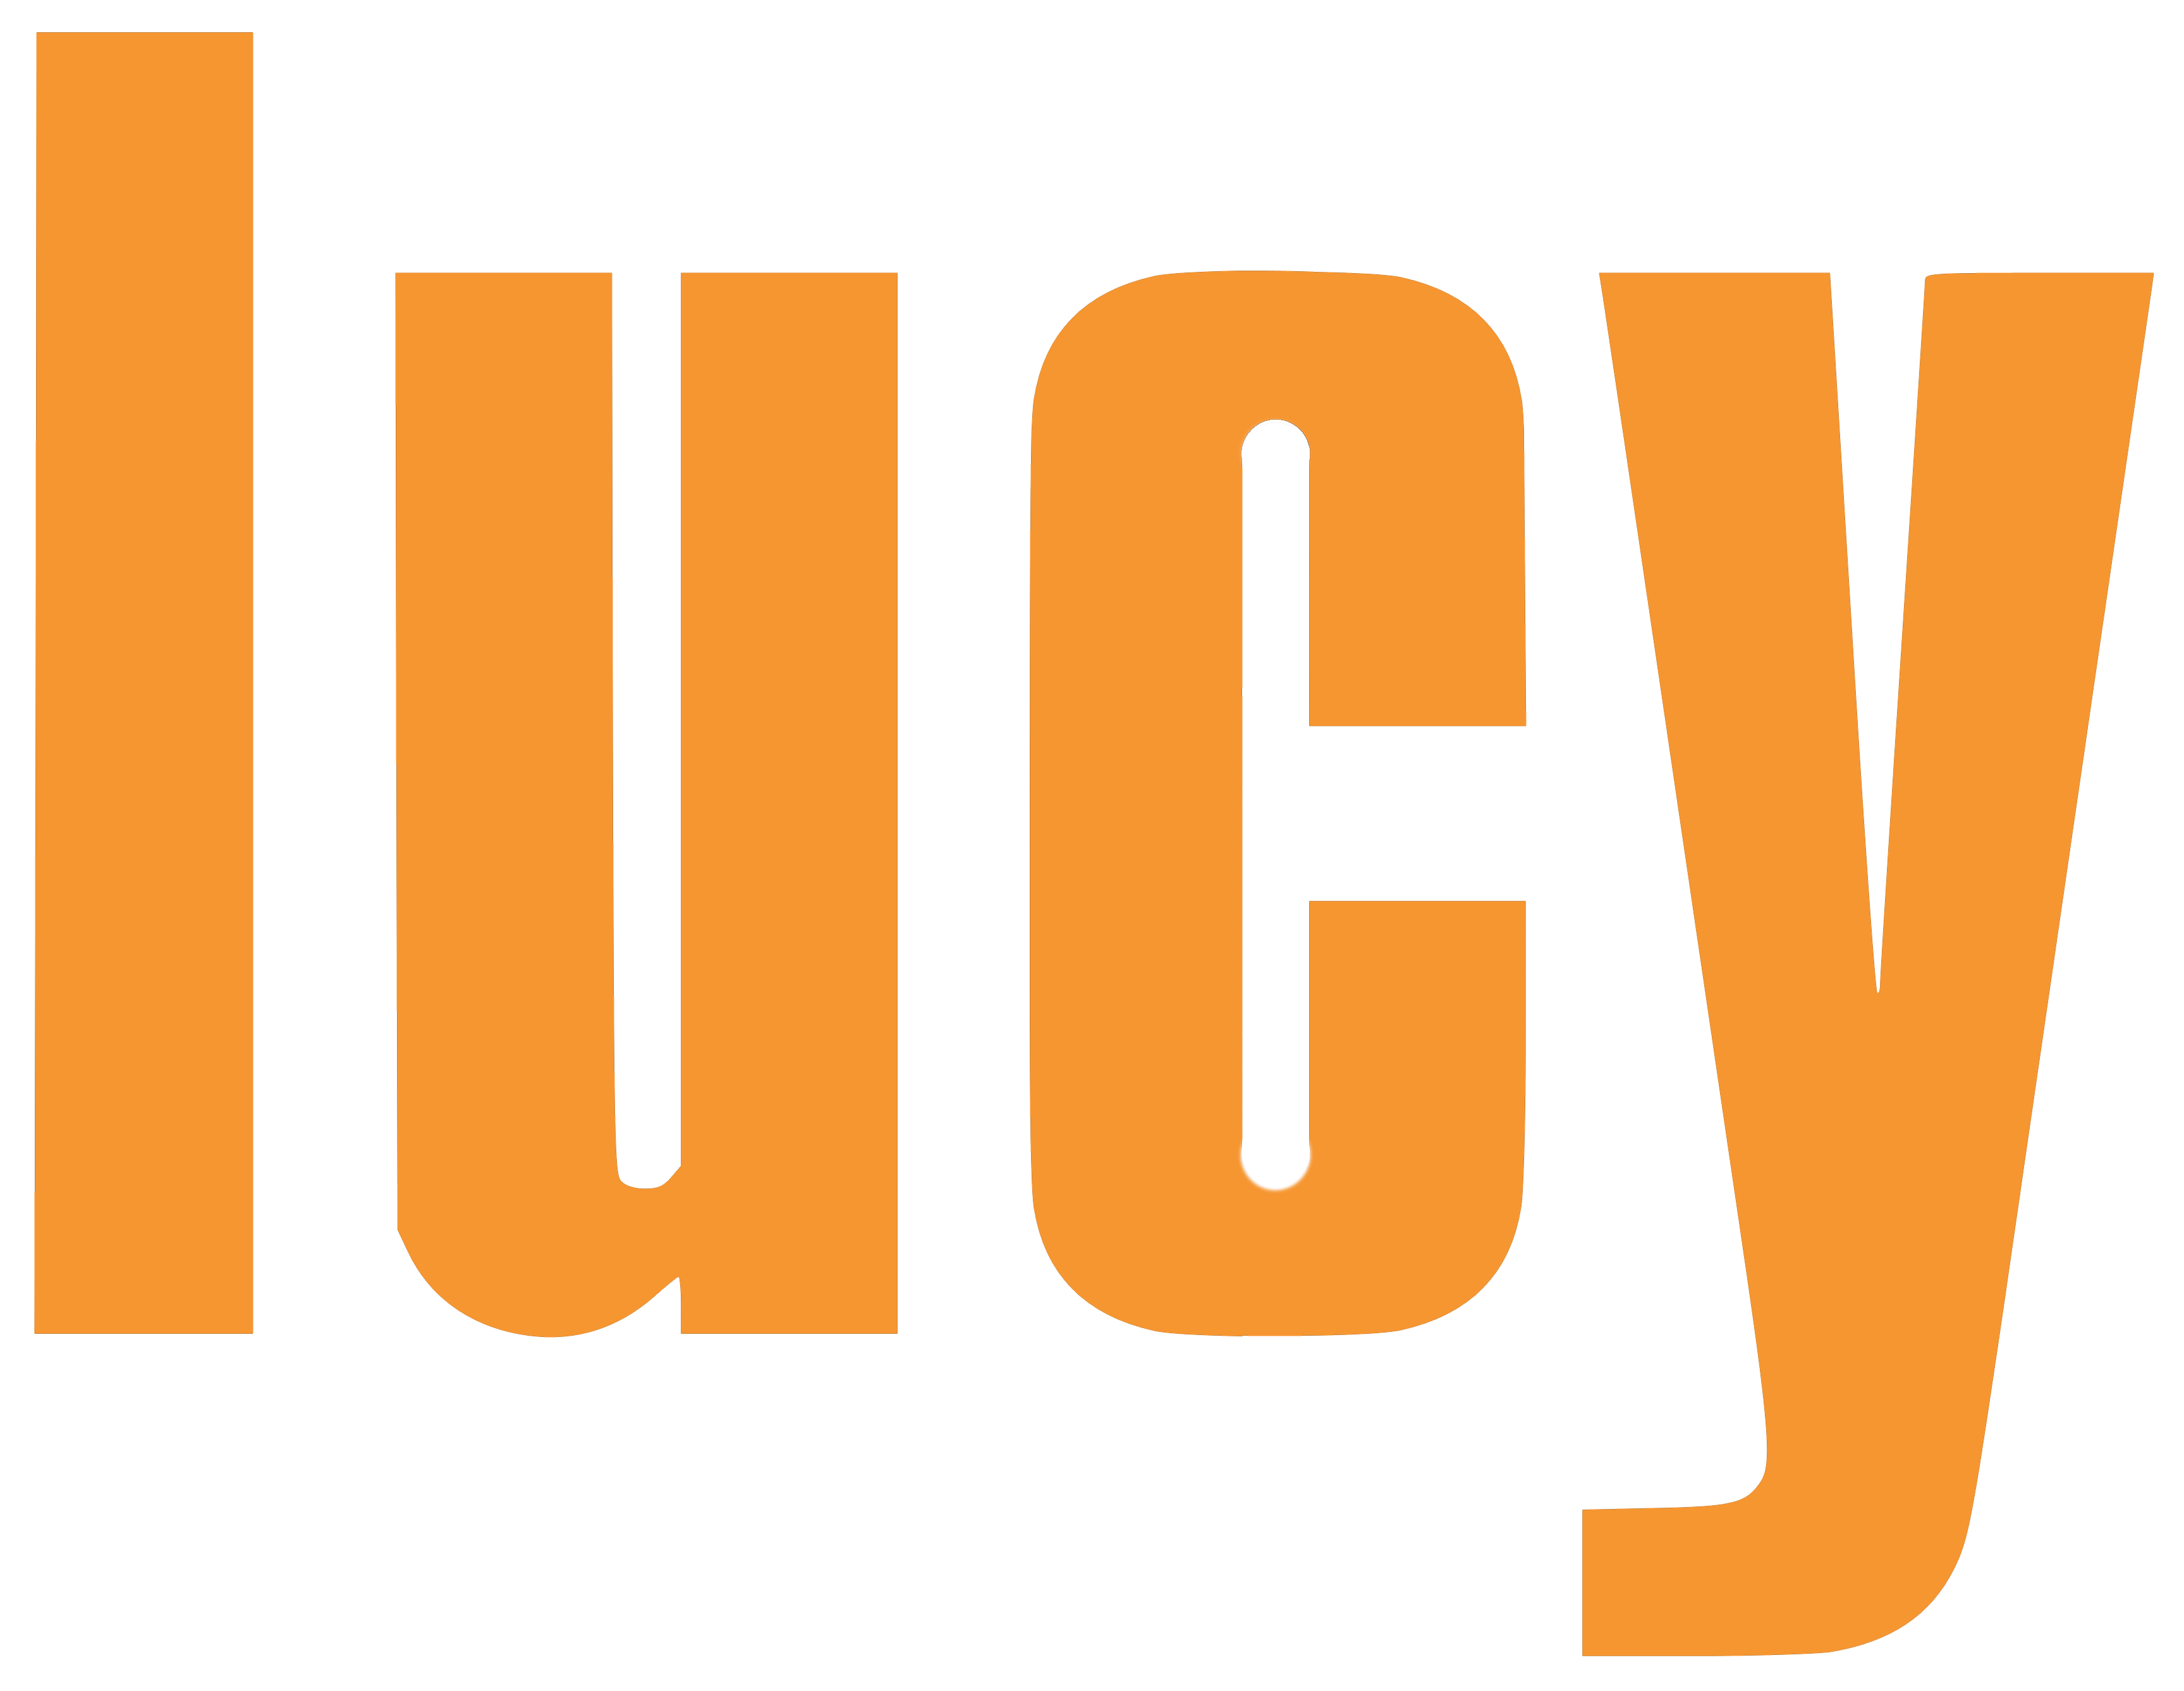 Lucy Logo - Lucy – Logos, brands and logotypes